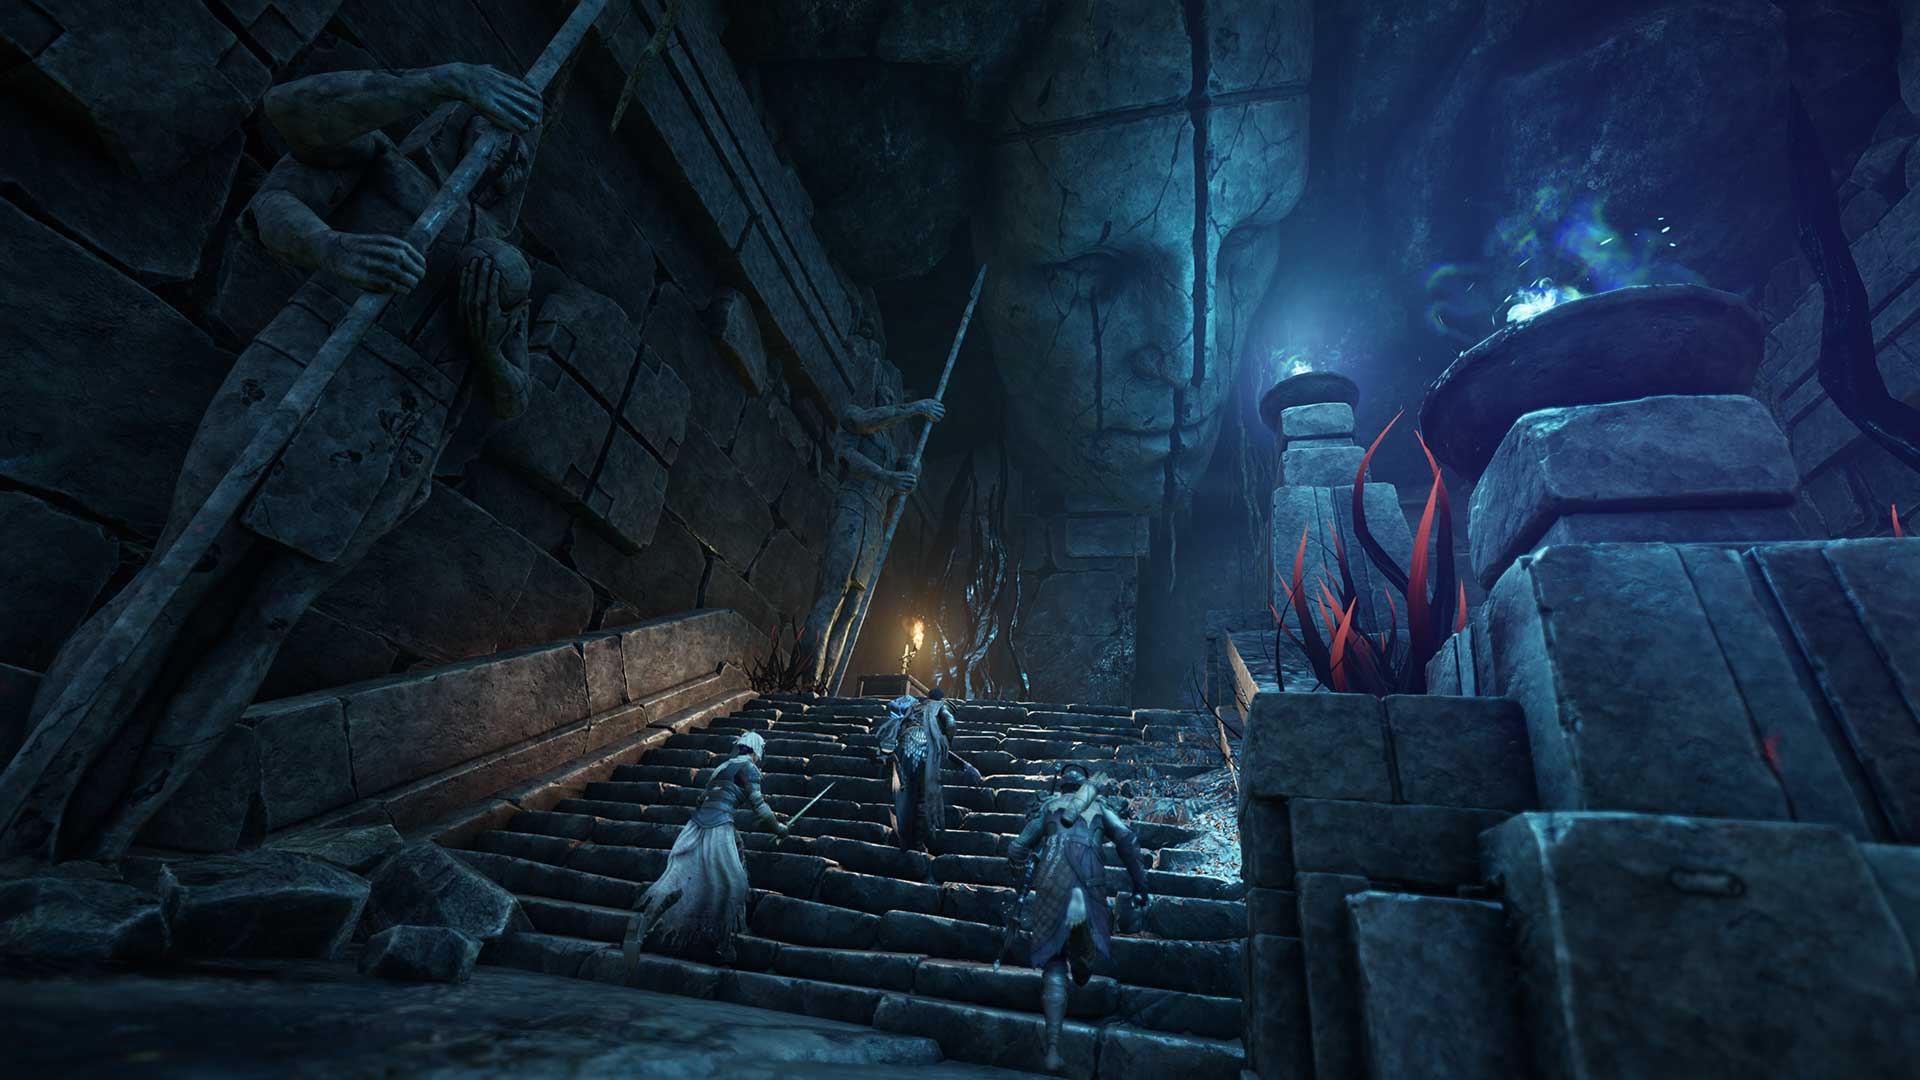 A group of adventurers with their weapons draw race up a flight of ancient stone stairs. The stairway is dimly lit with blue and orange flame sconces.